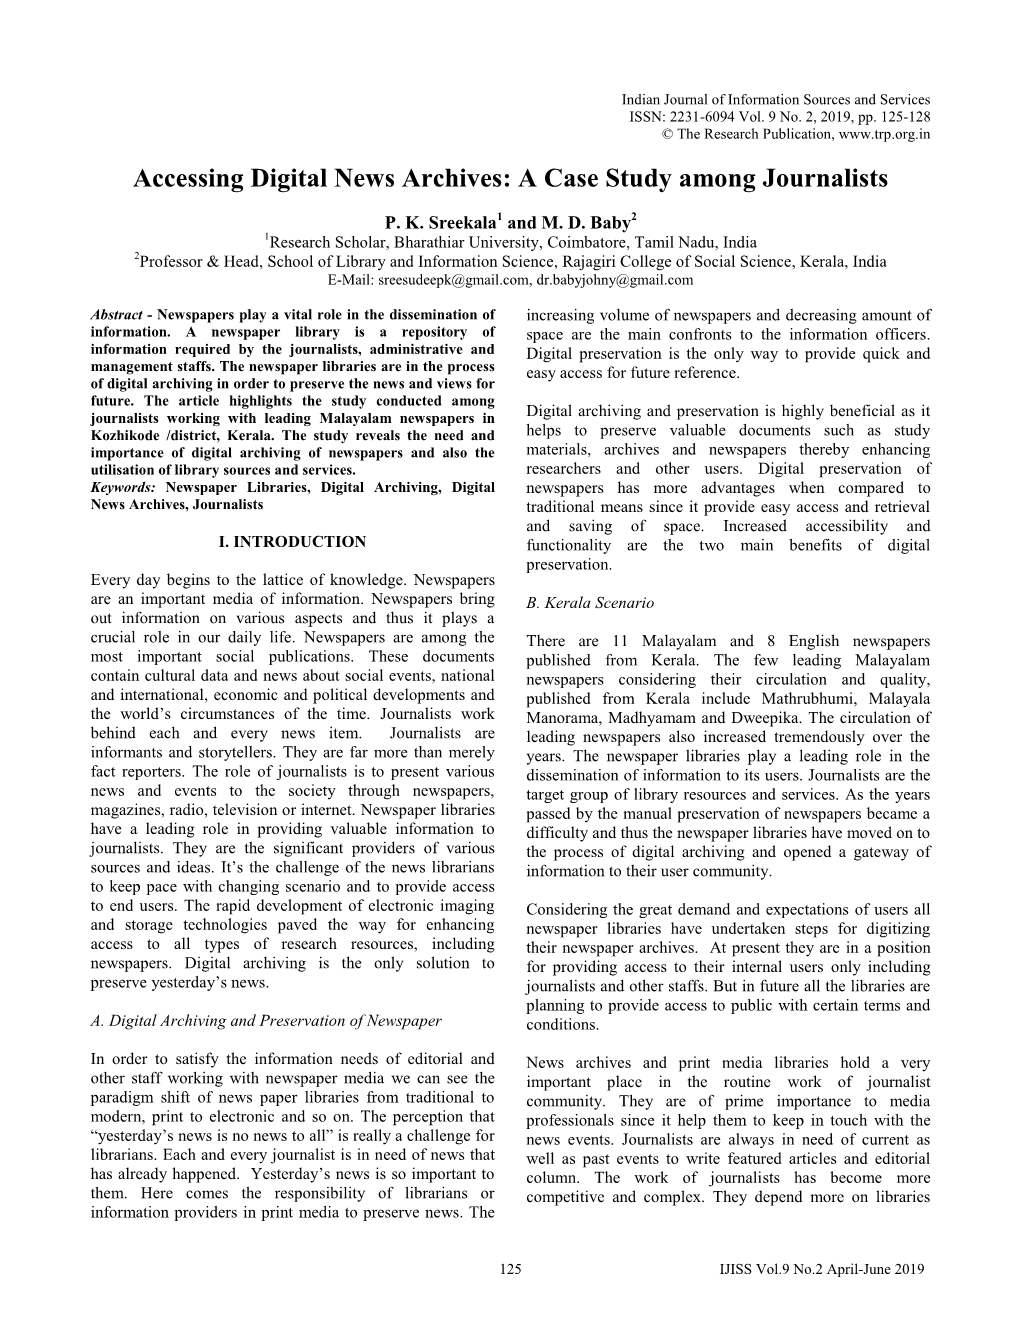 Accessing Digital News Archives: a Case Study Among Journalists